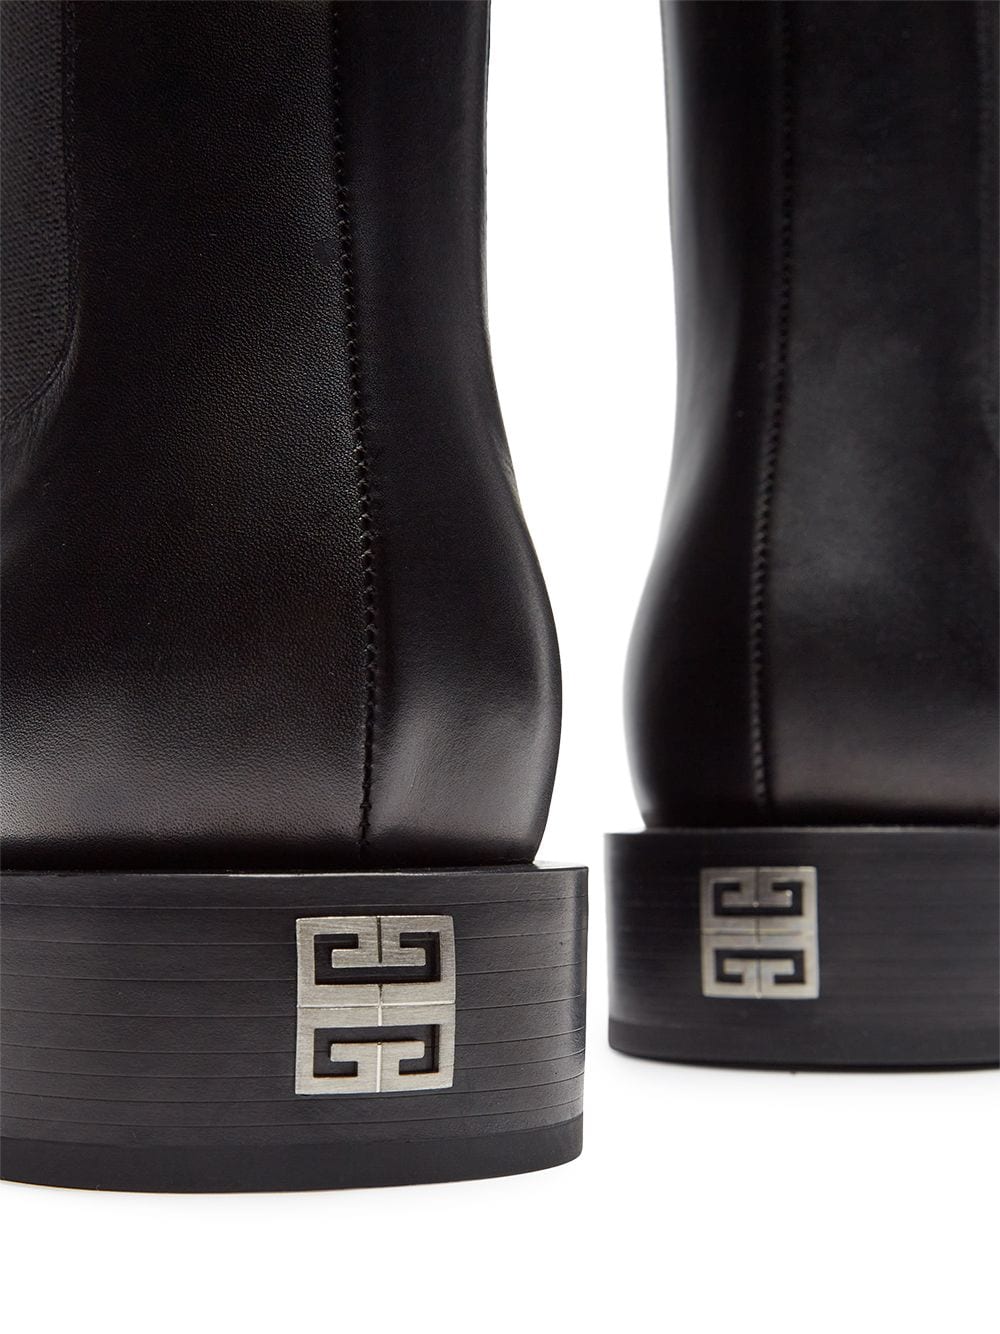 GIVENCHY Men's Black Leather Chelsea Ankle Boots with Signature 4G Motif